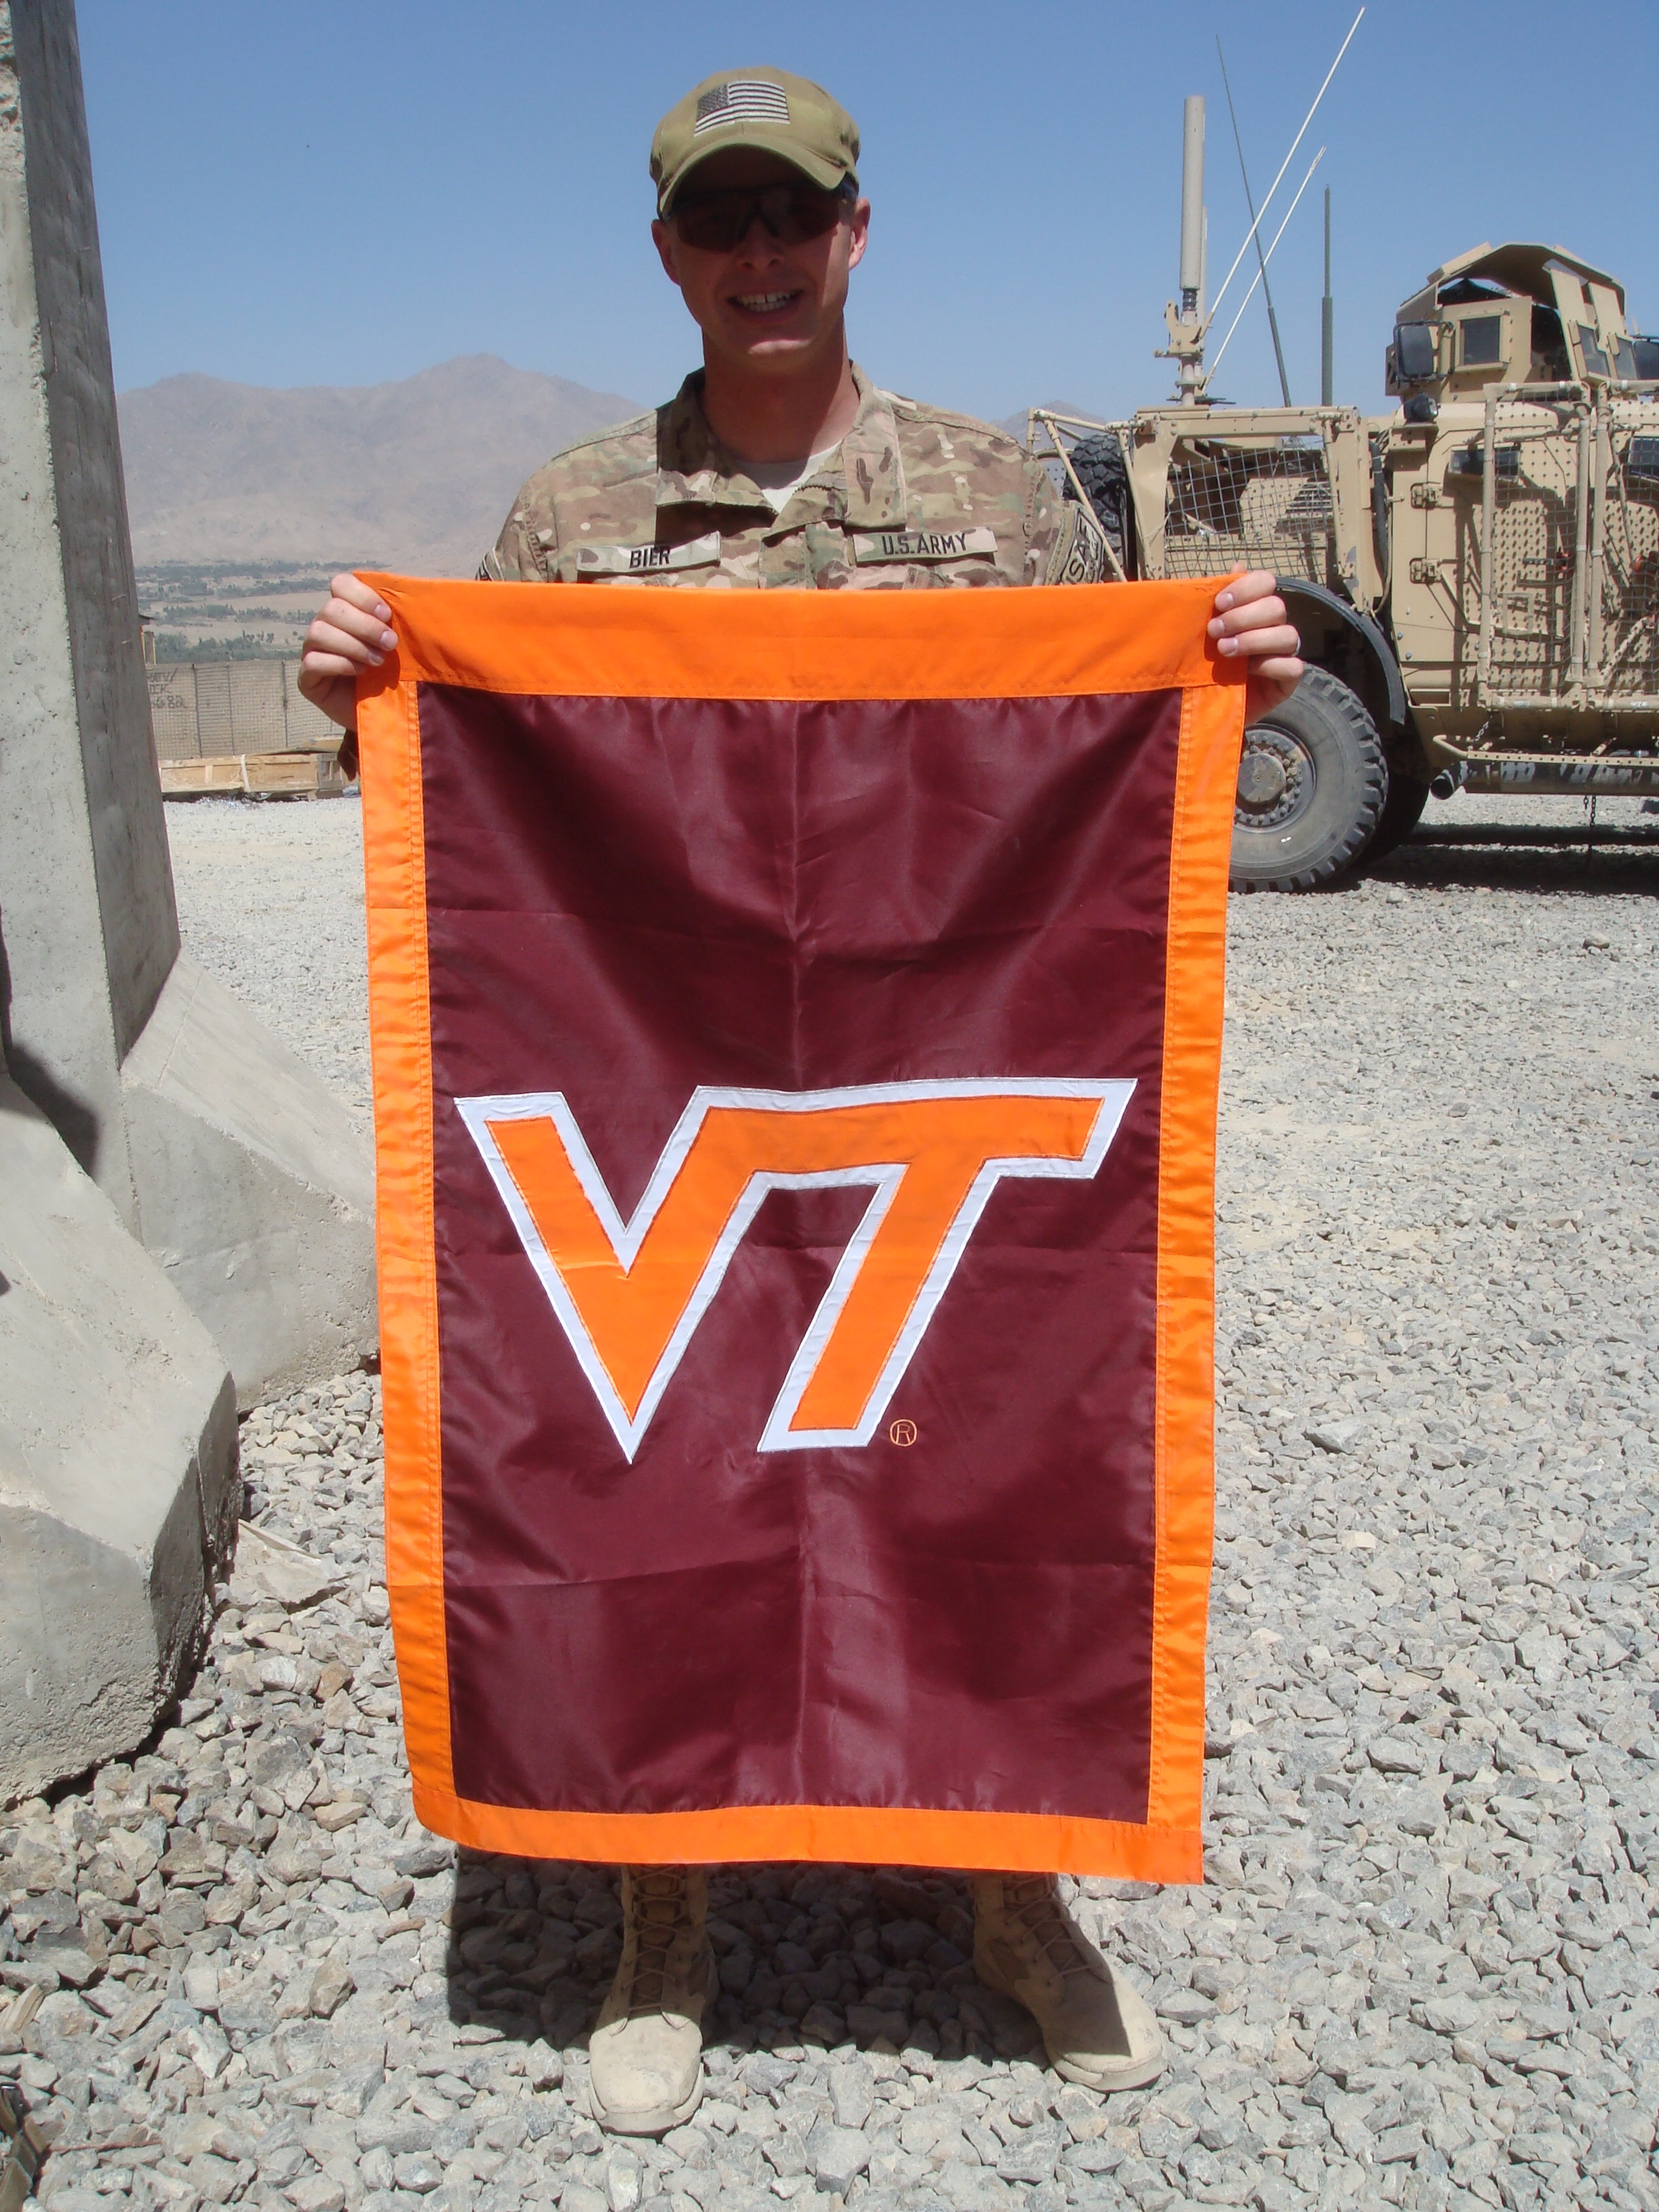 1st Lt. Nathan Bier, U.S. Army, Virginia Tech Corps of Cadets Class of 2011 in Afghanistan